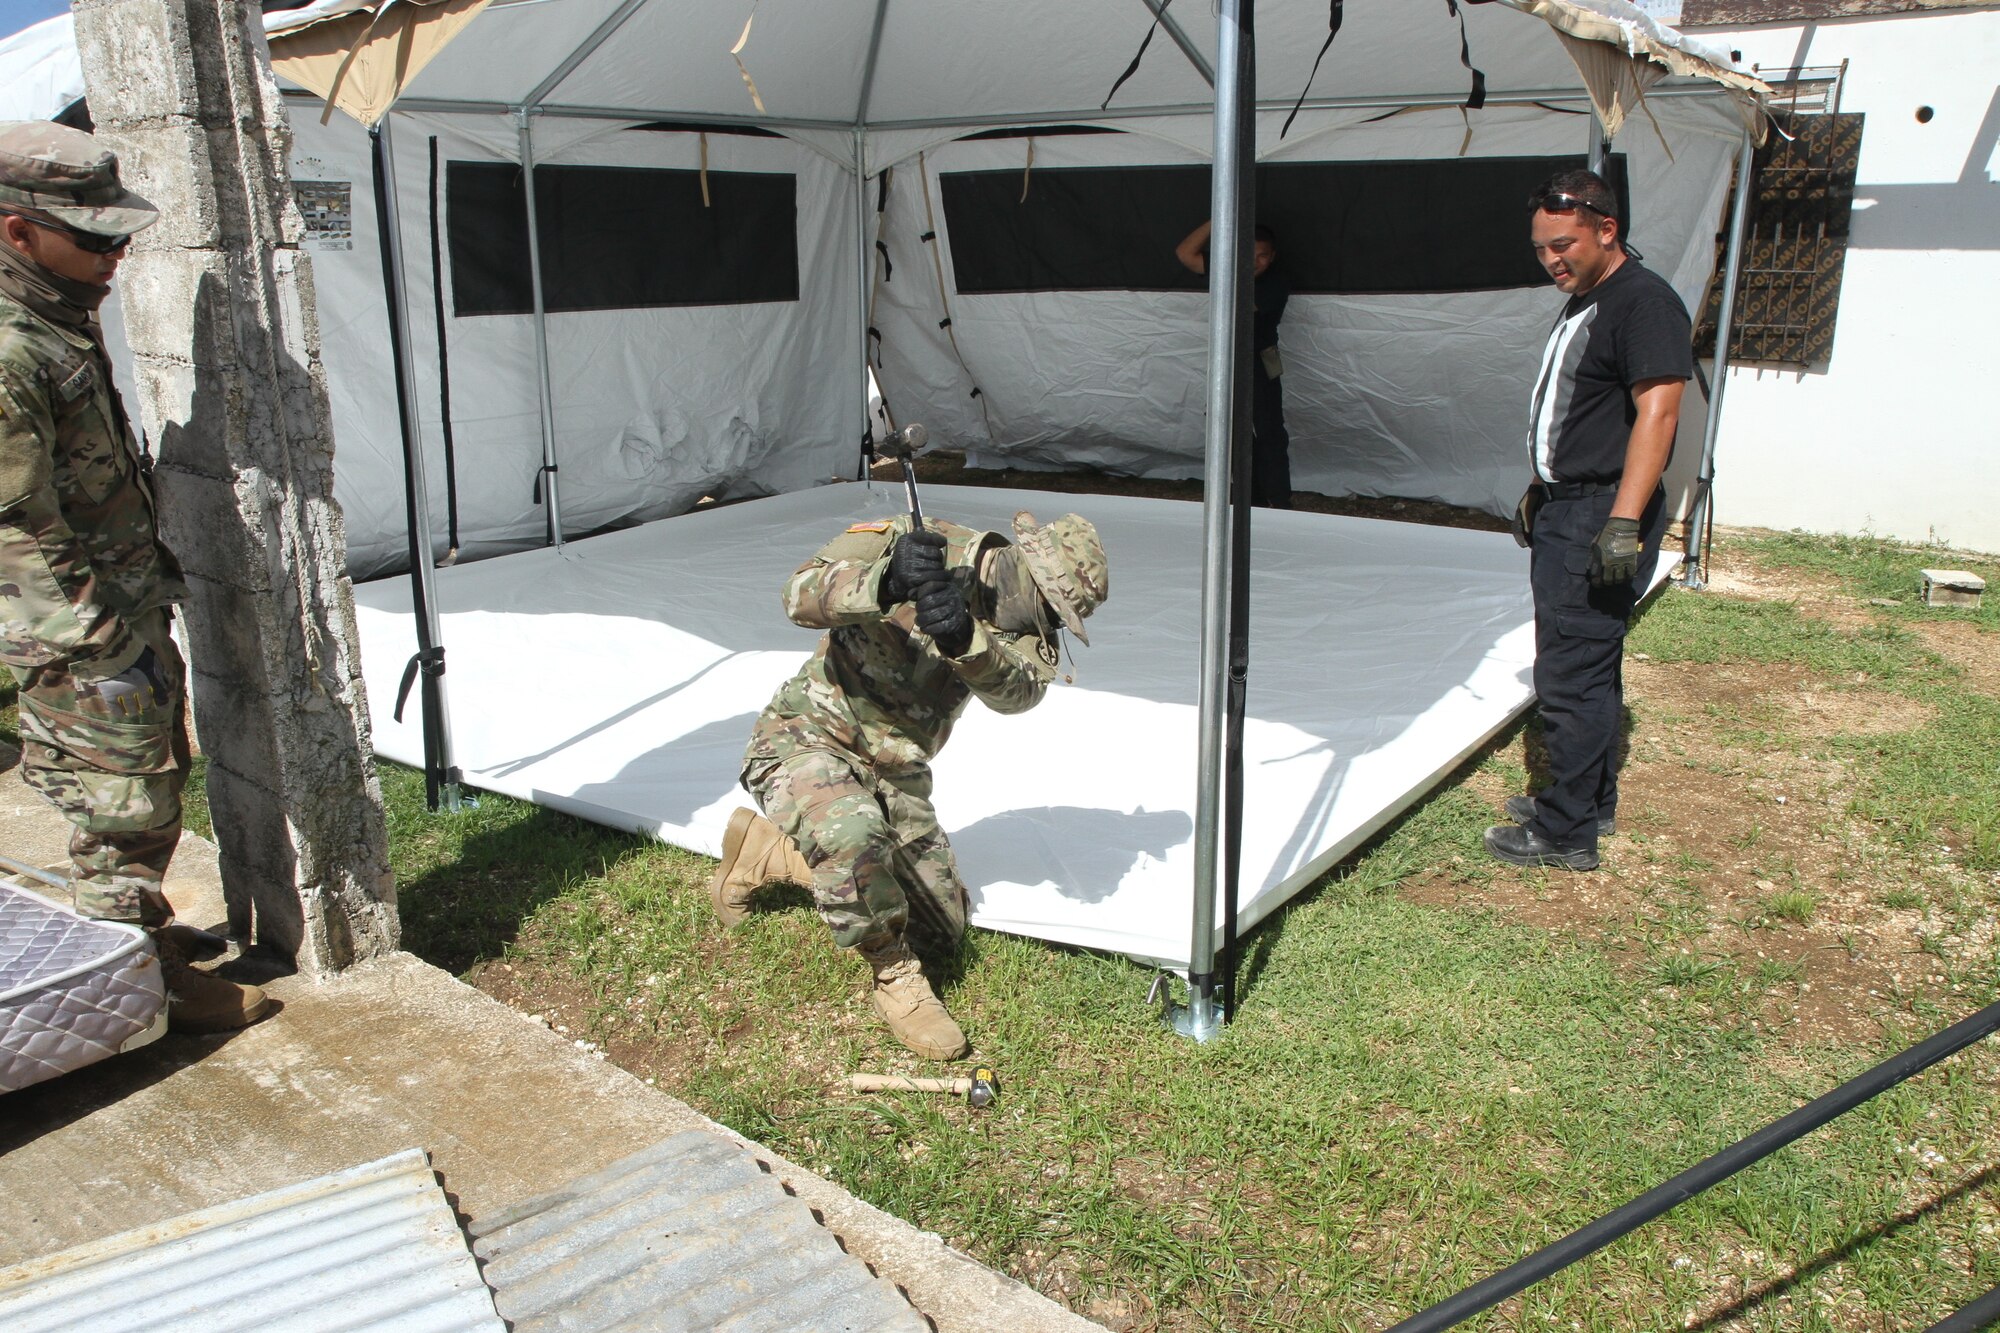 U.S. Army Spc. John Blas, a Soldier with the 797th Engineer Company (Vertical), 9th Mission Support Command, currently assigned to Joint Task Group-Saipan, Task Force-West, stakes a metal rod into the ground to secure a FEMA tent, which will be used as temporary shelter for Saipan residents impacted by Typhoon Yutu, Nov. 9, 2018.